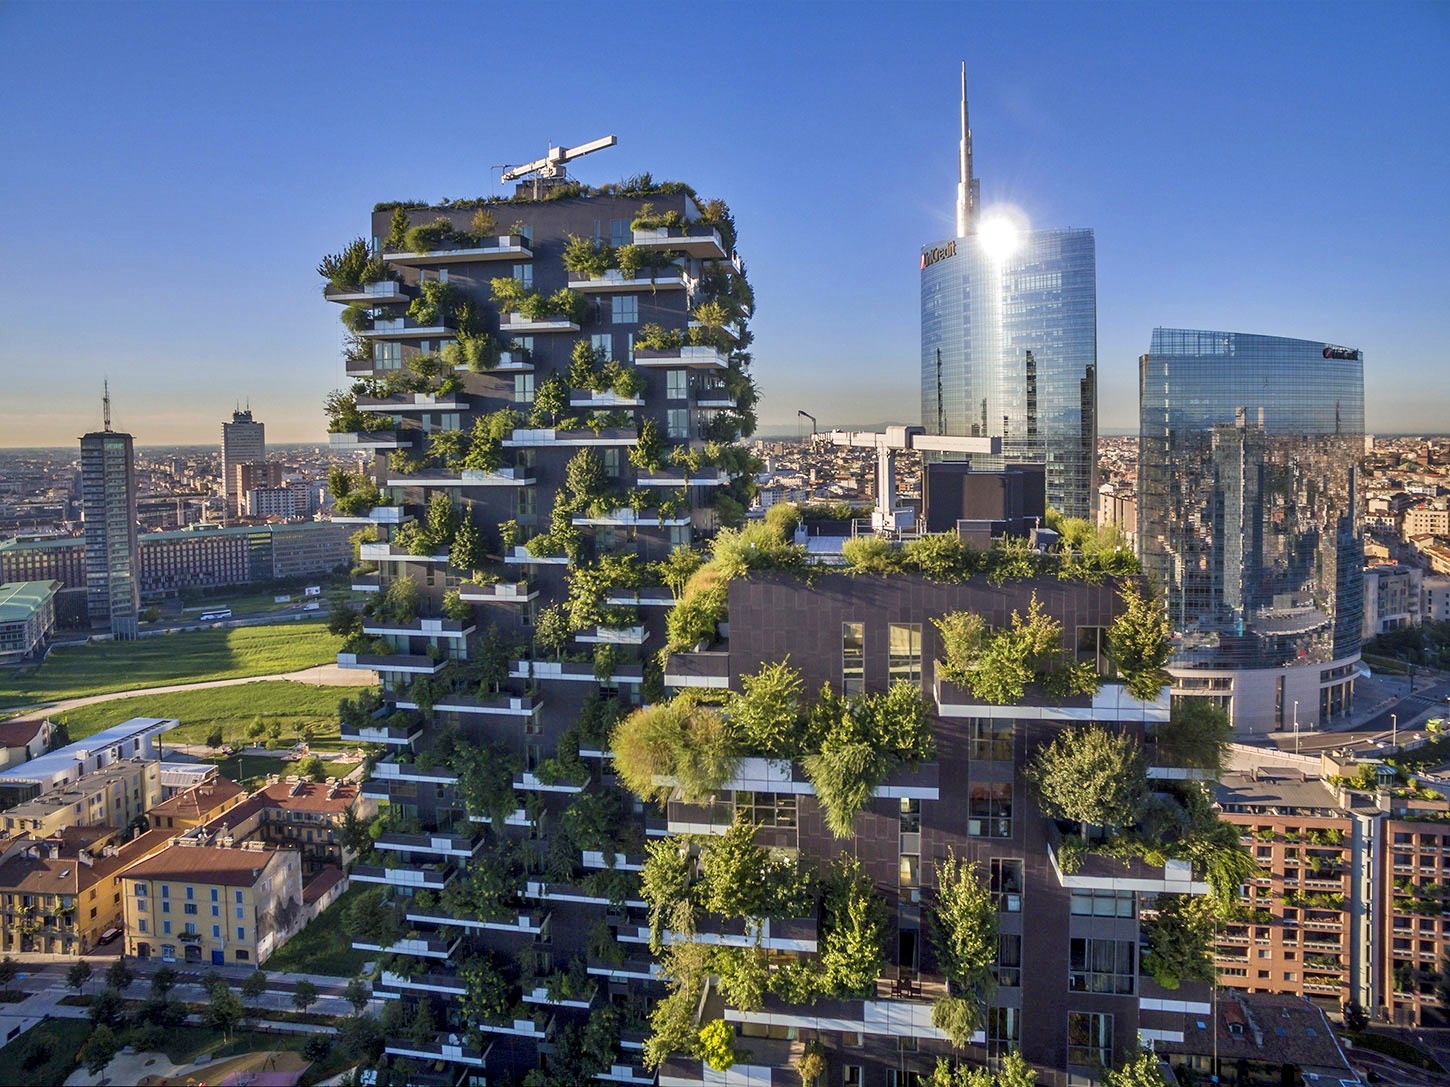 Green Urban Infrastructure and Green Roofs